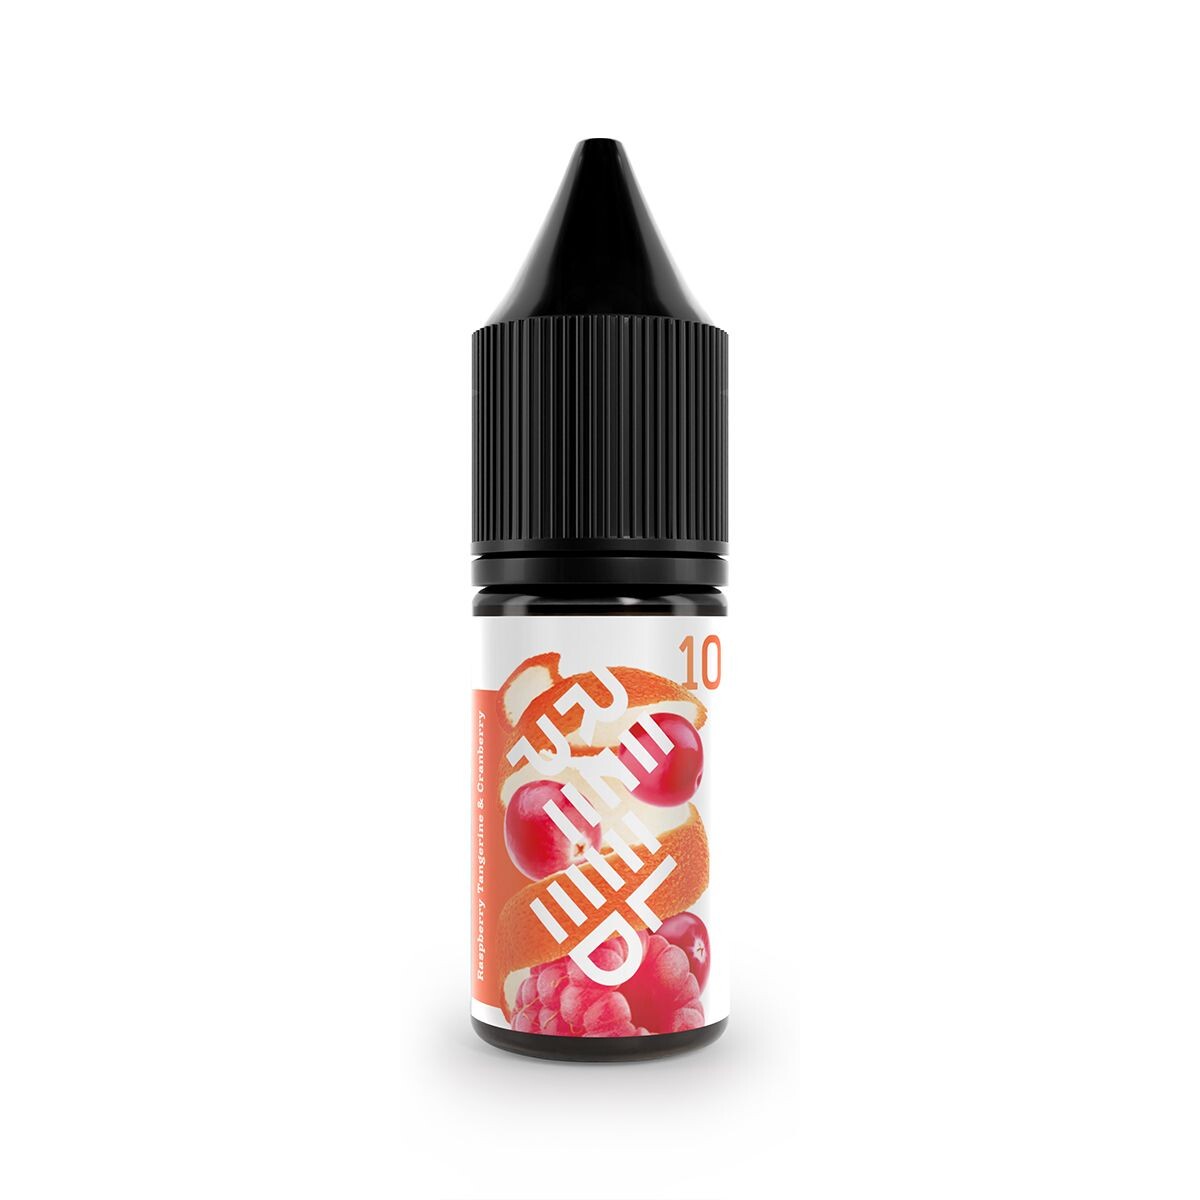 Raspberry, Tangerine and Cranberry flavour e-liquid 10ml nic salt by repeeled